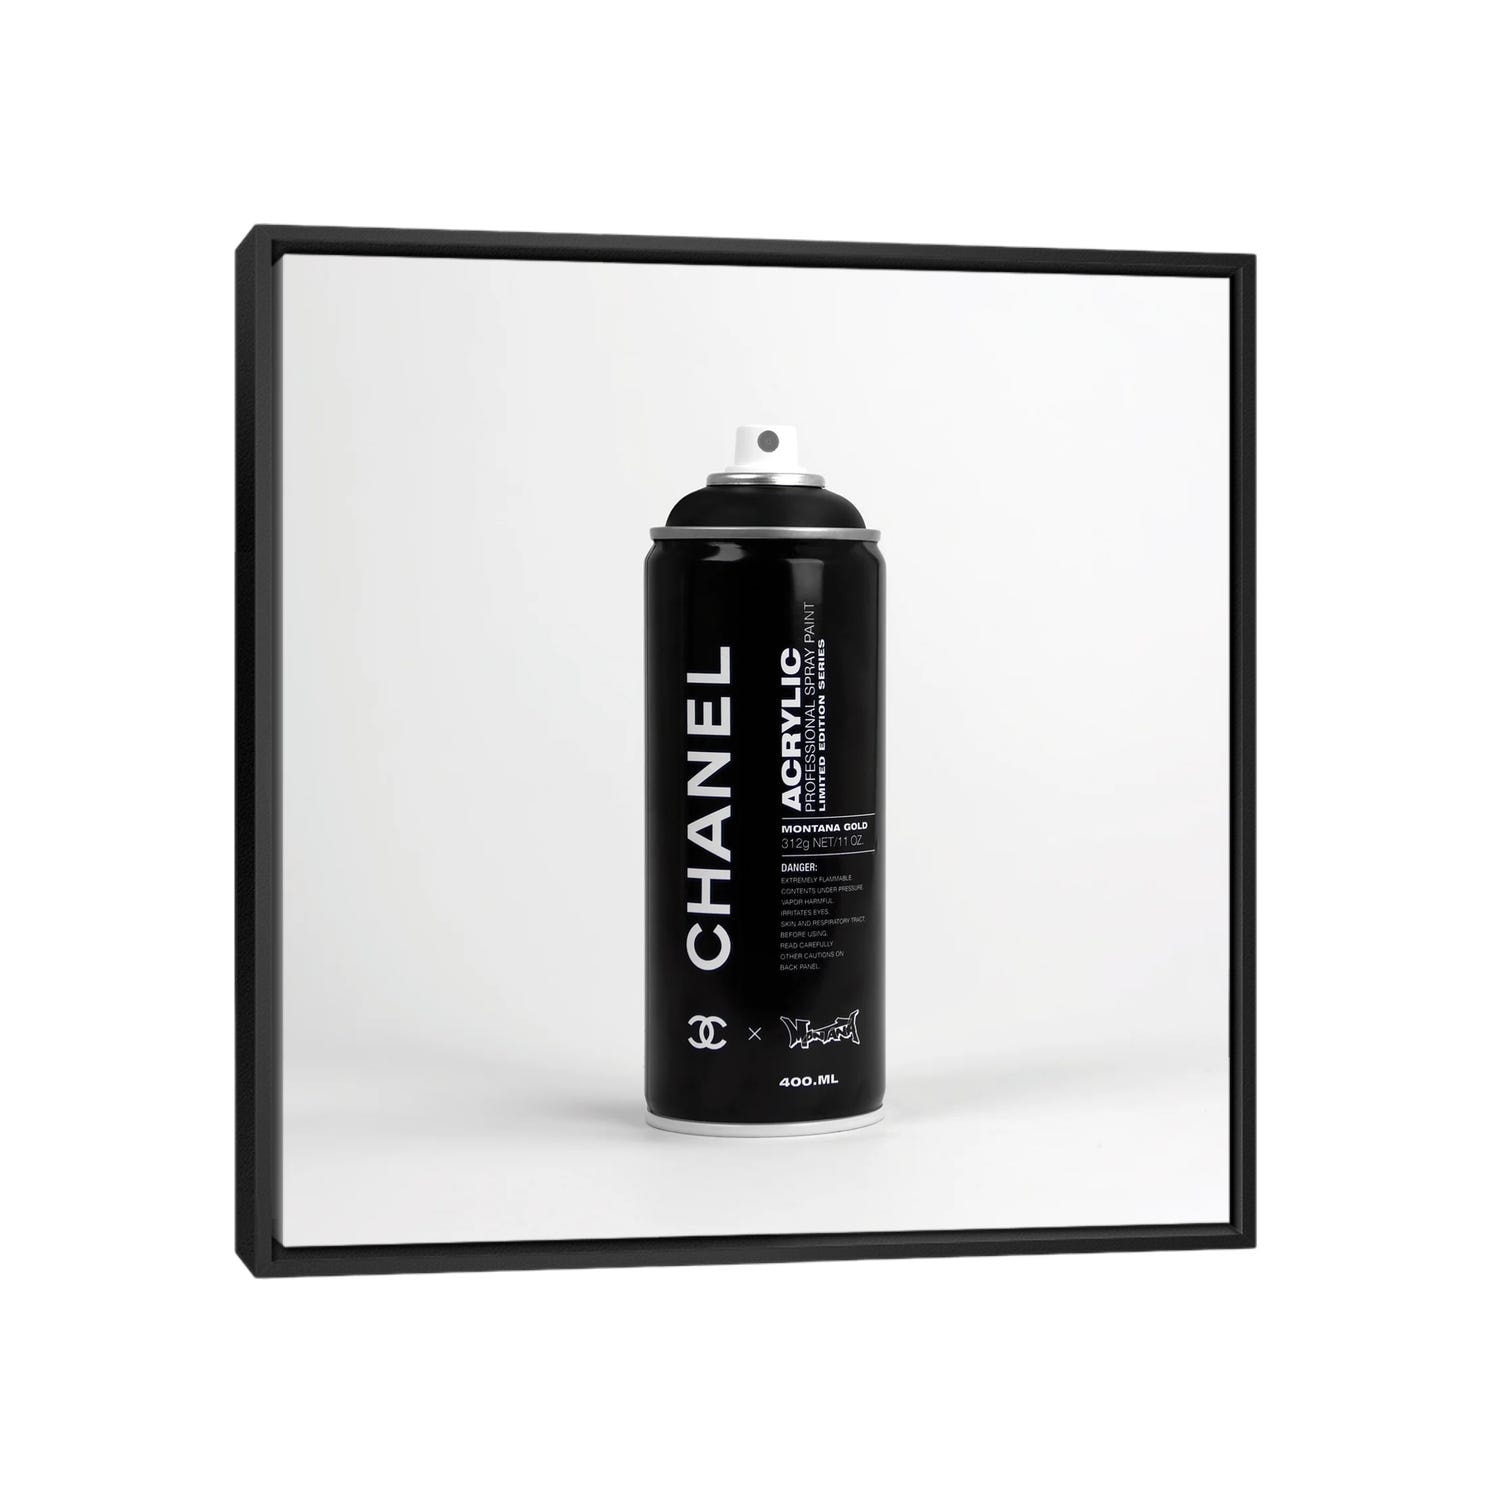 https://ak1.ostkcdn.com/images/products/is/images/direct/85fbe75820402b941053d4eff6a7ffe94c9ac568/iCanvas-%22Brandalism-Chanel-Spray-Paint-Can%22-by-Antonio-Brasko-Framed-Canvas-Print.jpg